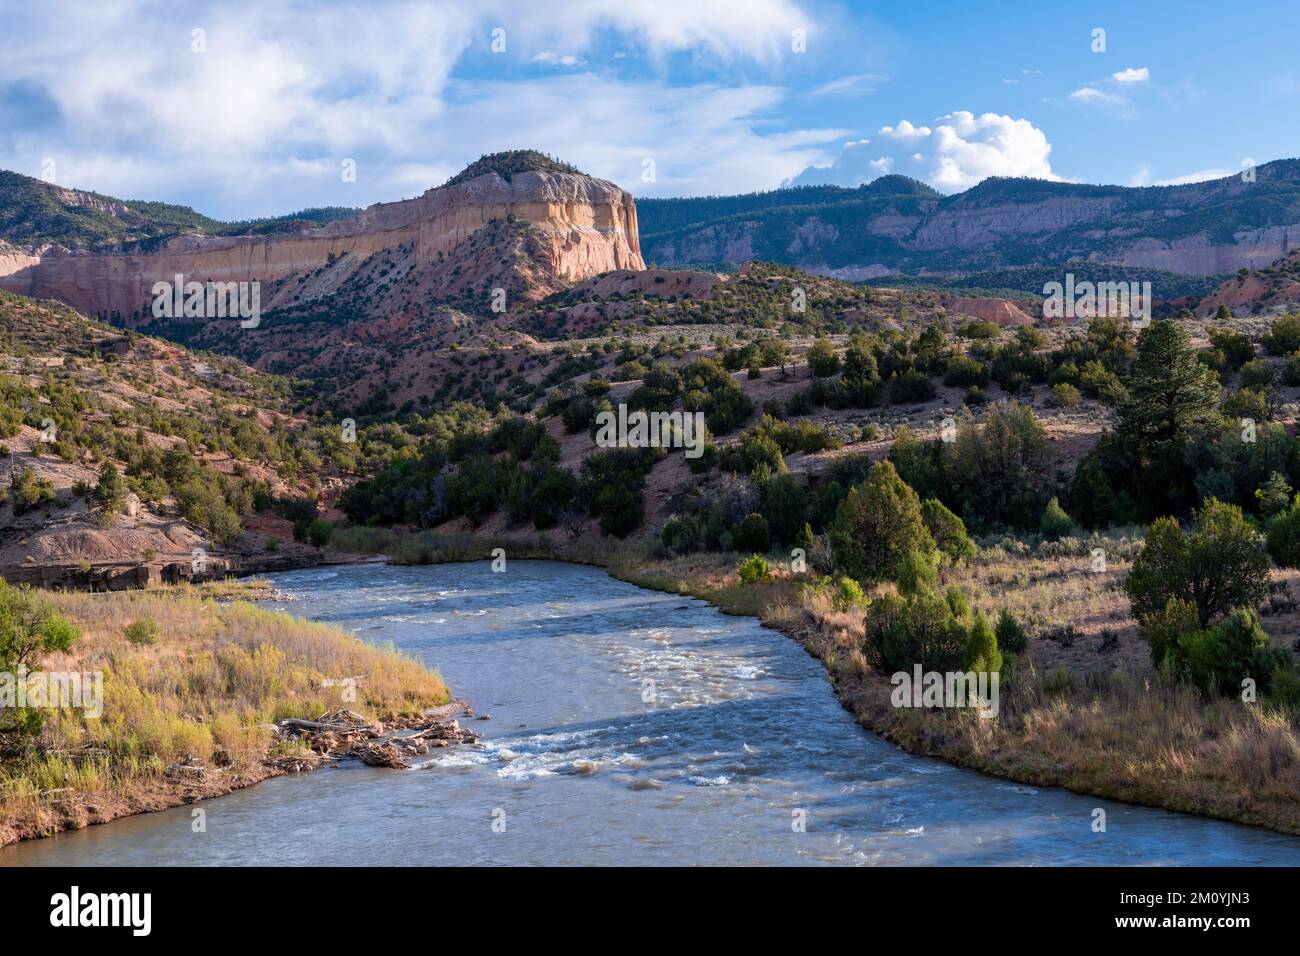 Rio Chama river flows through a colorful desert landscape of mesas and mountains in New Mexico Stock Photo